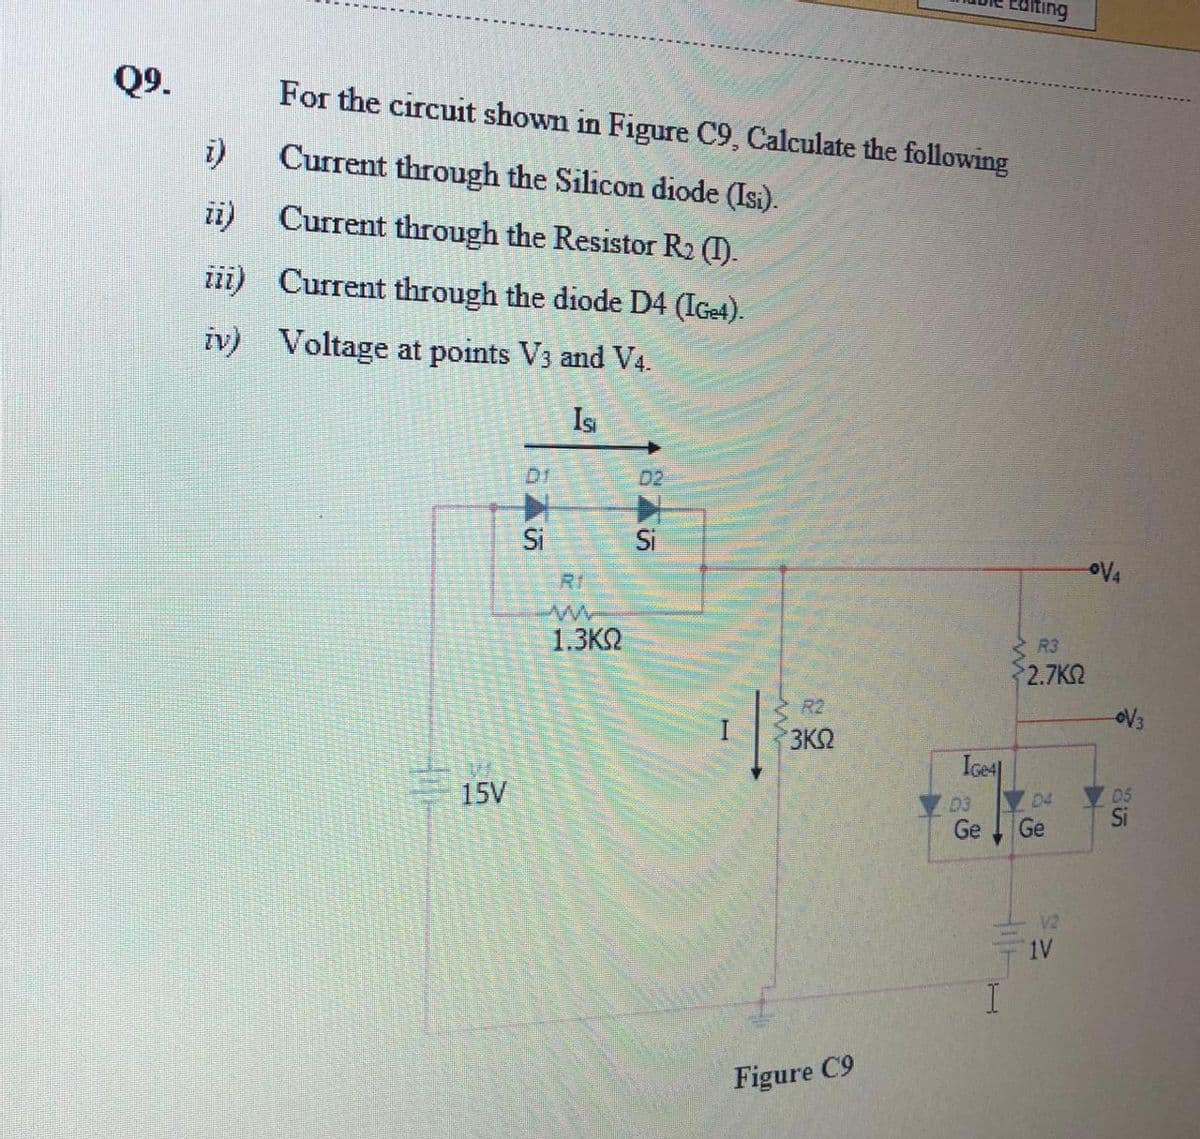 liting
Q9.
For the circuit shown in Figure C9, Calculate the following
i)
Current through the Silicon diode (Isi).
ii)
Current through the Resistor R2 (1).
iii) Current through the diode D4 (IGe4).
iv) Voltage at points V3 and V4.
Is
D1.
D2
Si
Si
oV4
RI
1.3K2
R3
2.7K
R2
3K2
IGe4|
15V
D5
Si
03
D4
Ge
Ge
V2
1V
Figure C9
